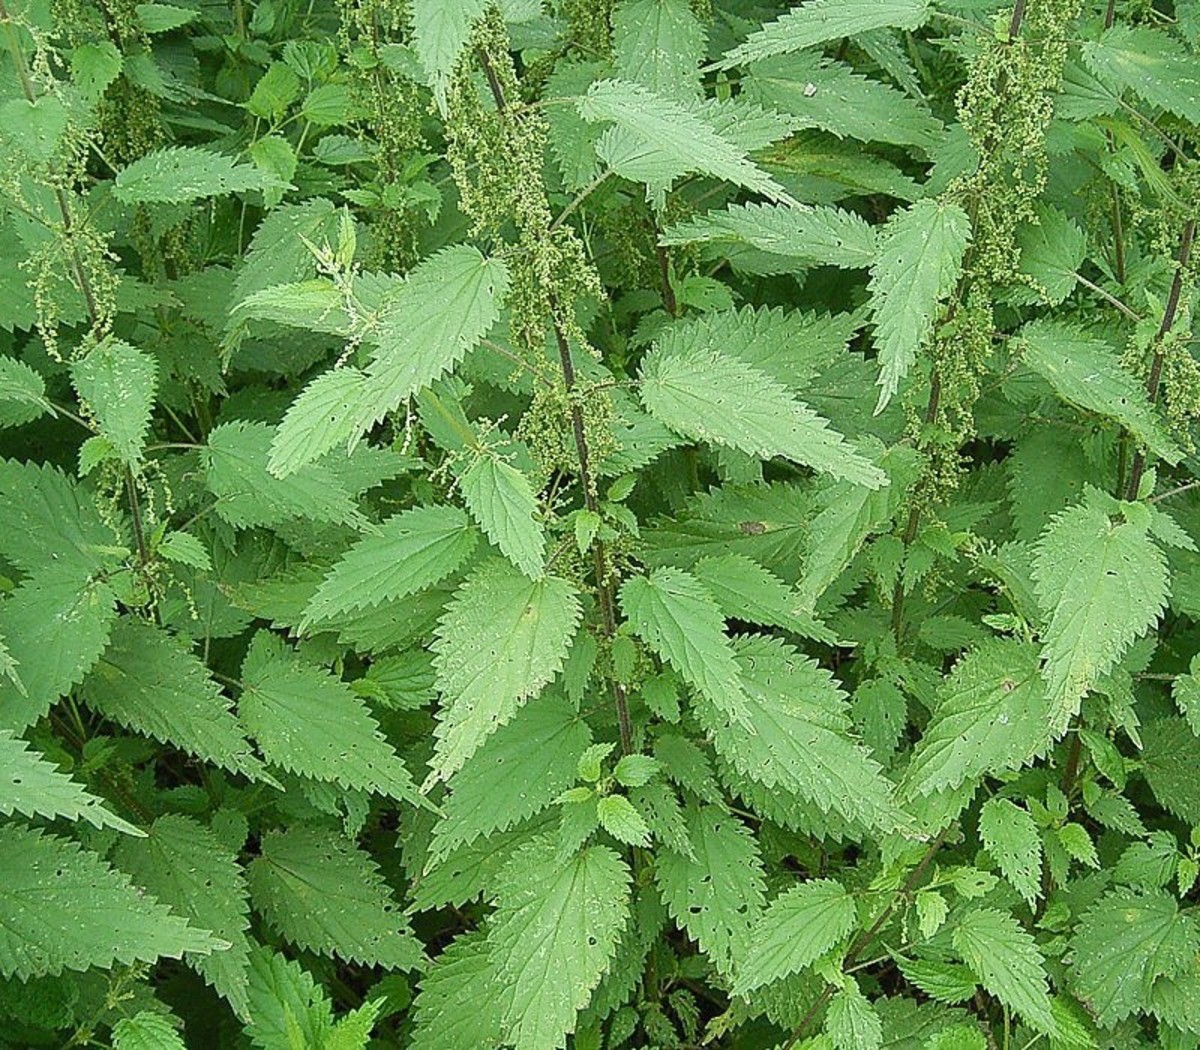 Stinging nettles, or Urtica dioica